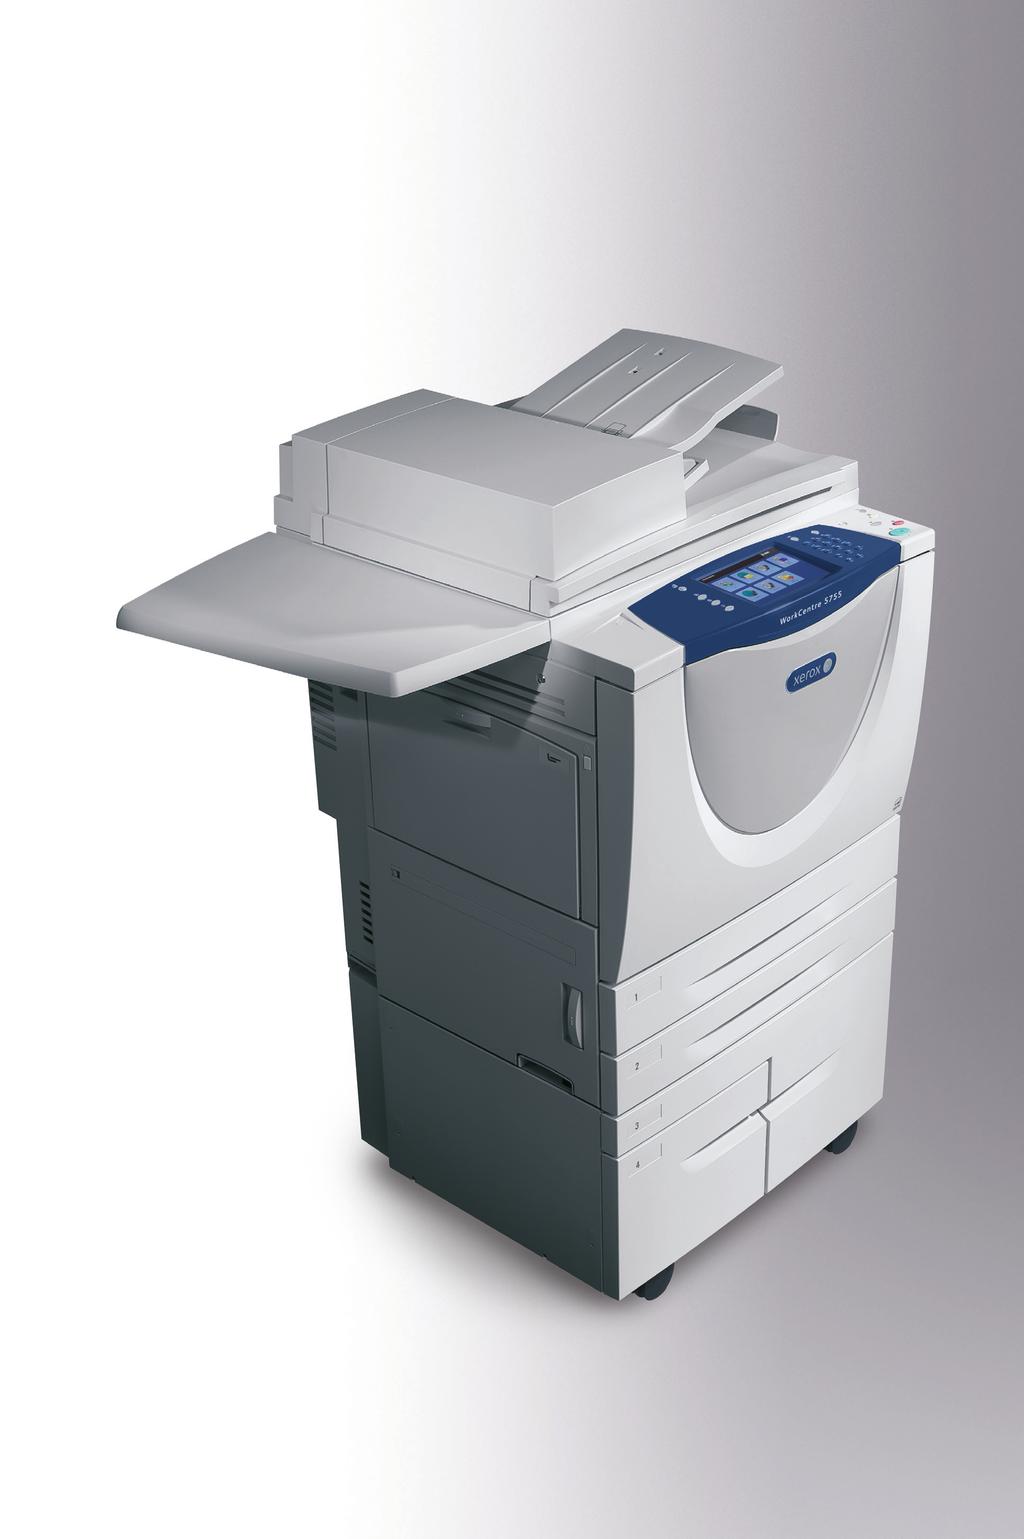 WorkCentre 5735 / 5740 / 5745 / 5755 Tabloid-size Black-and-white Multifunction Printer Xerox